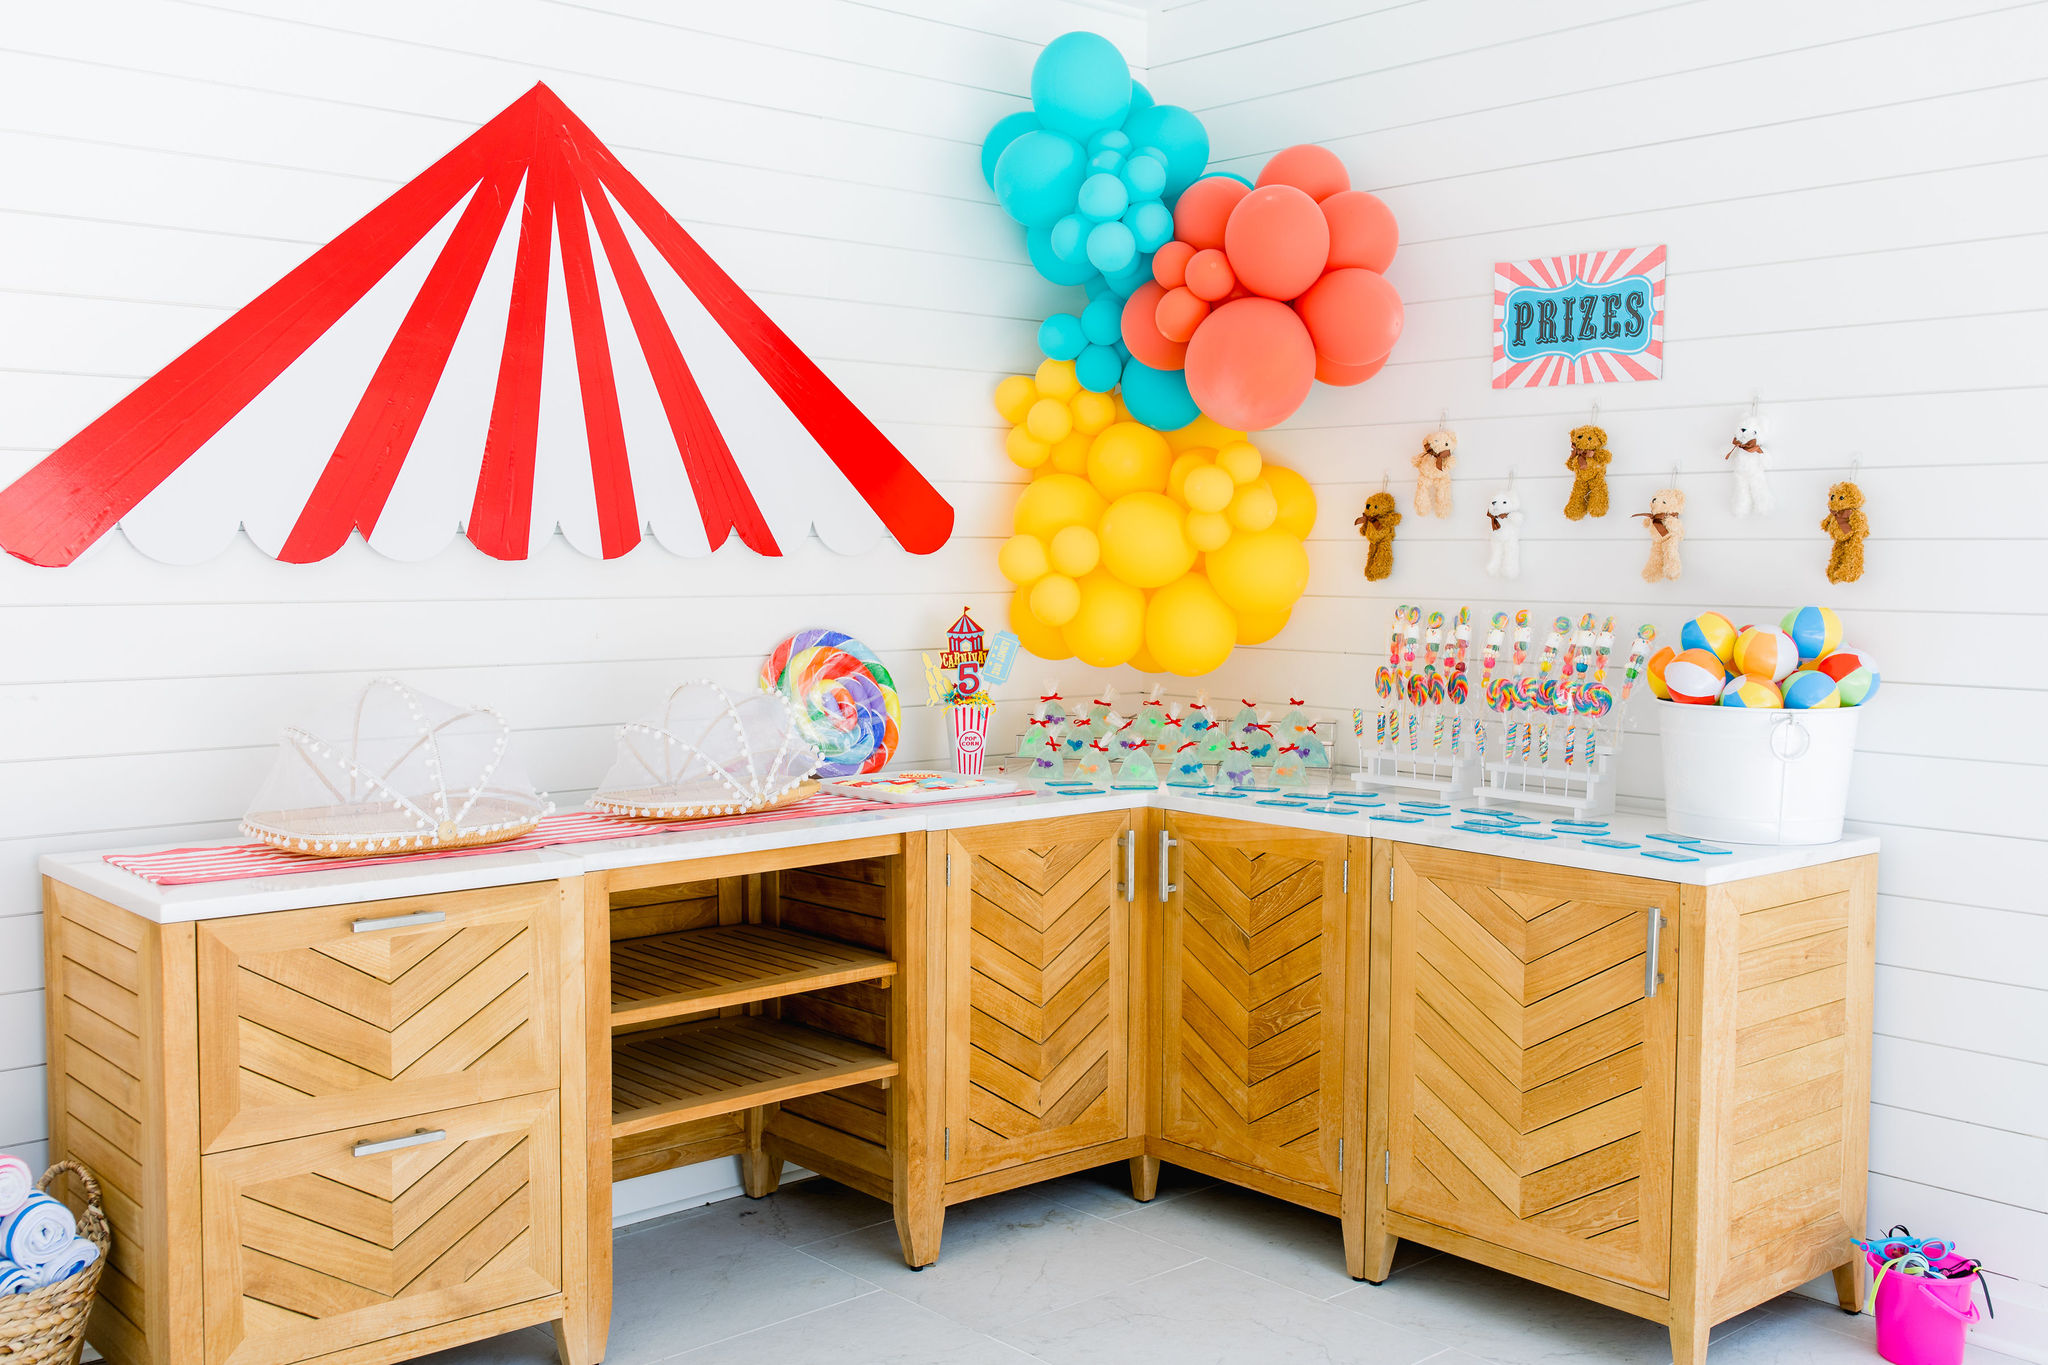 Riley's Carnival Birthday Party! - Ali Manno (Fedotowsky)